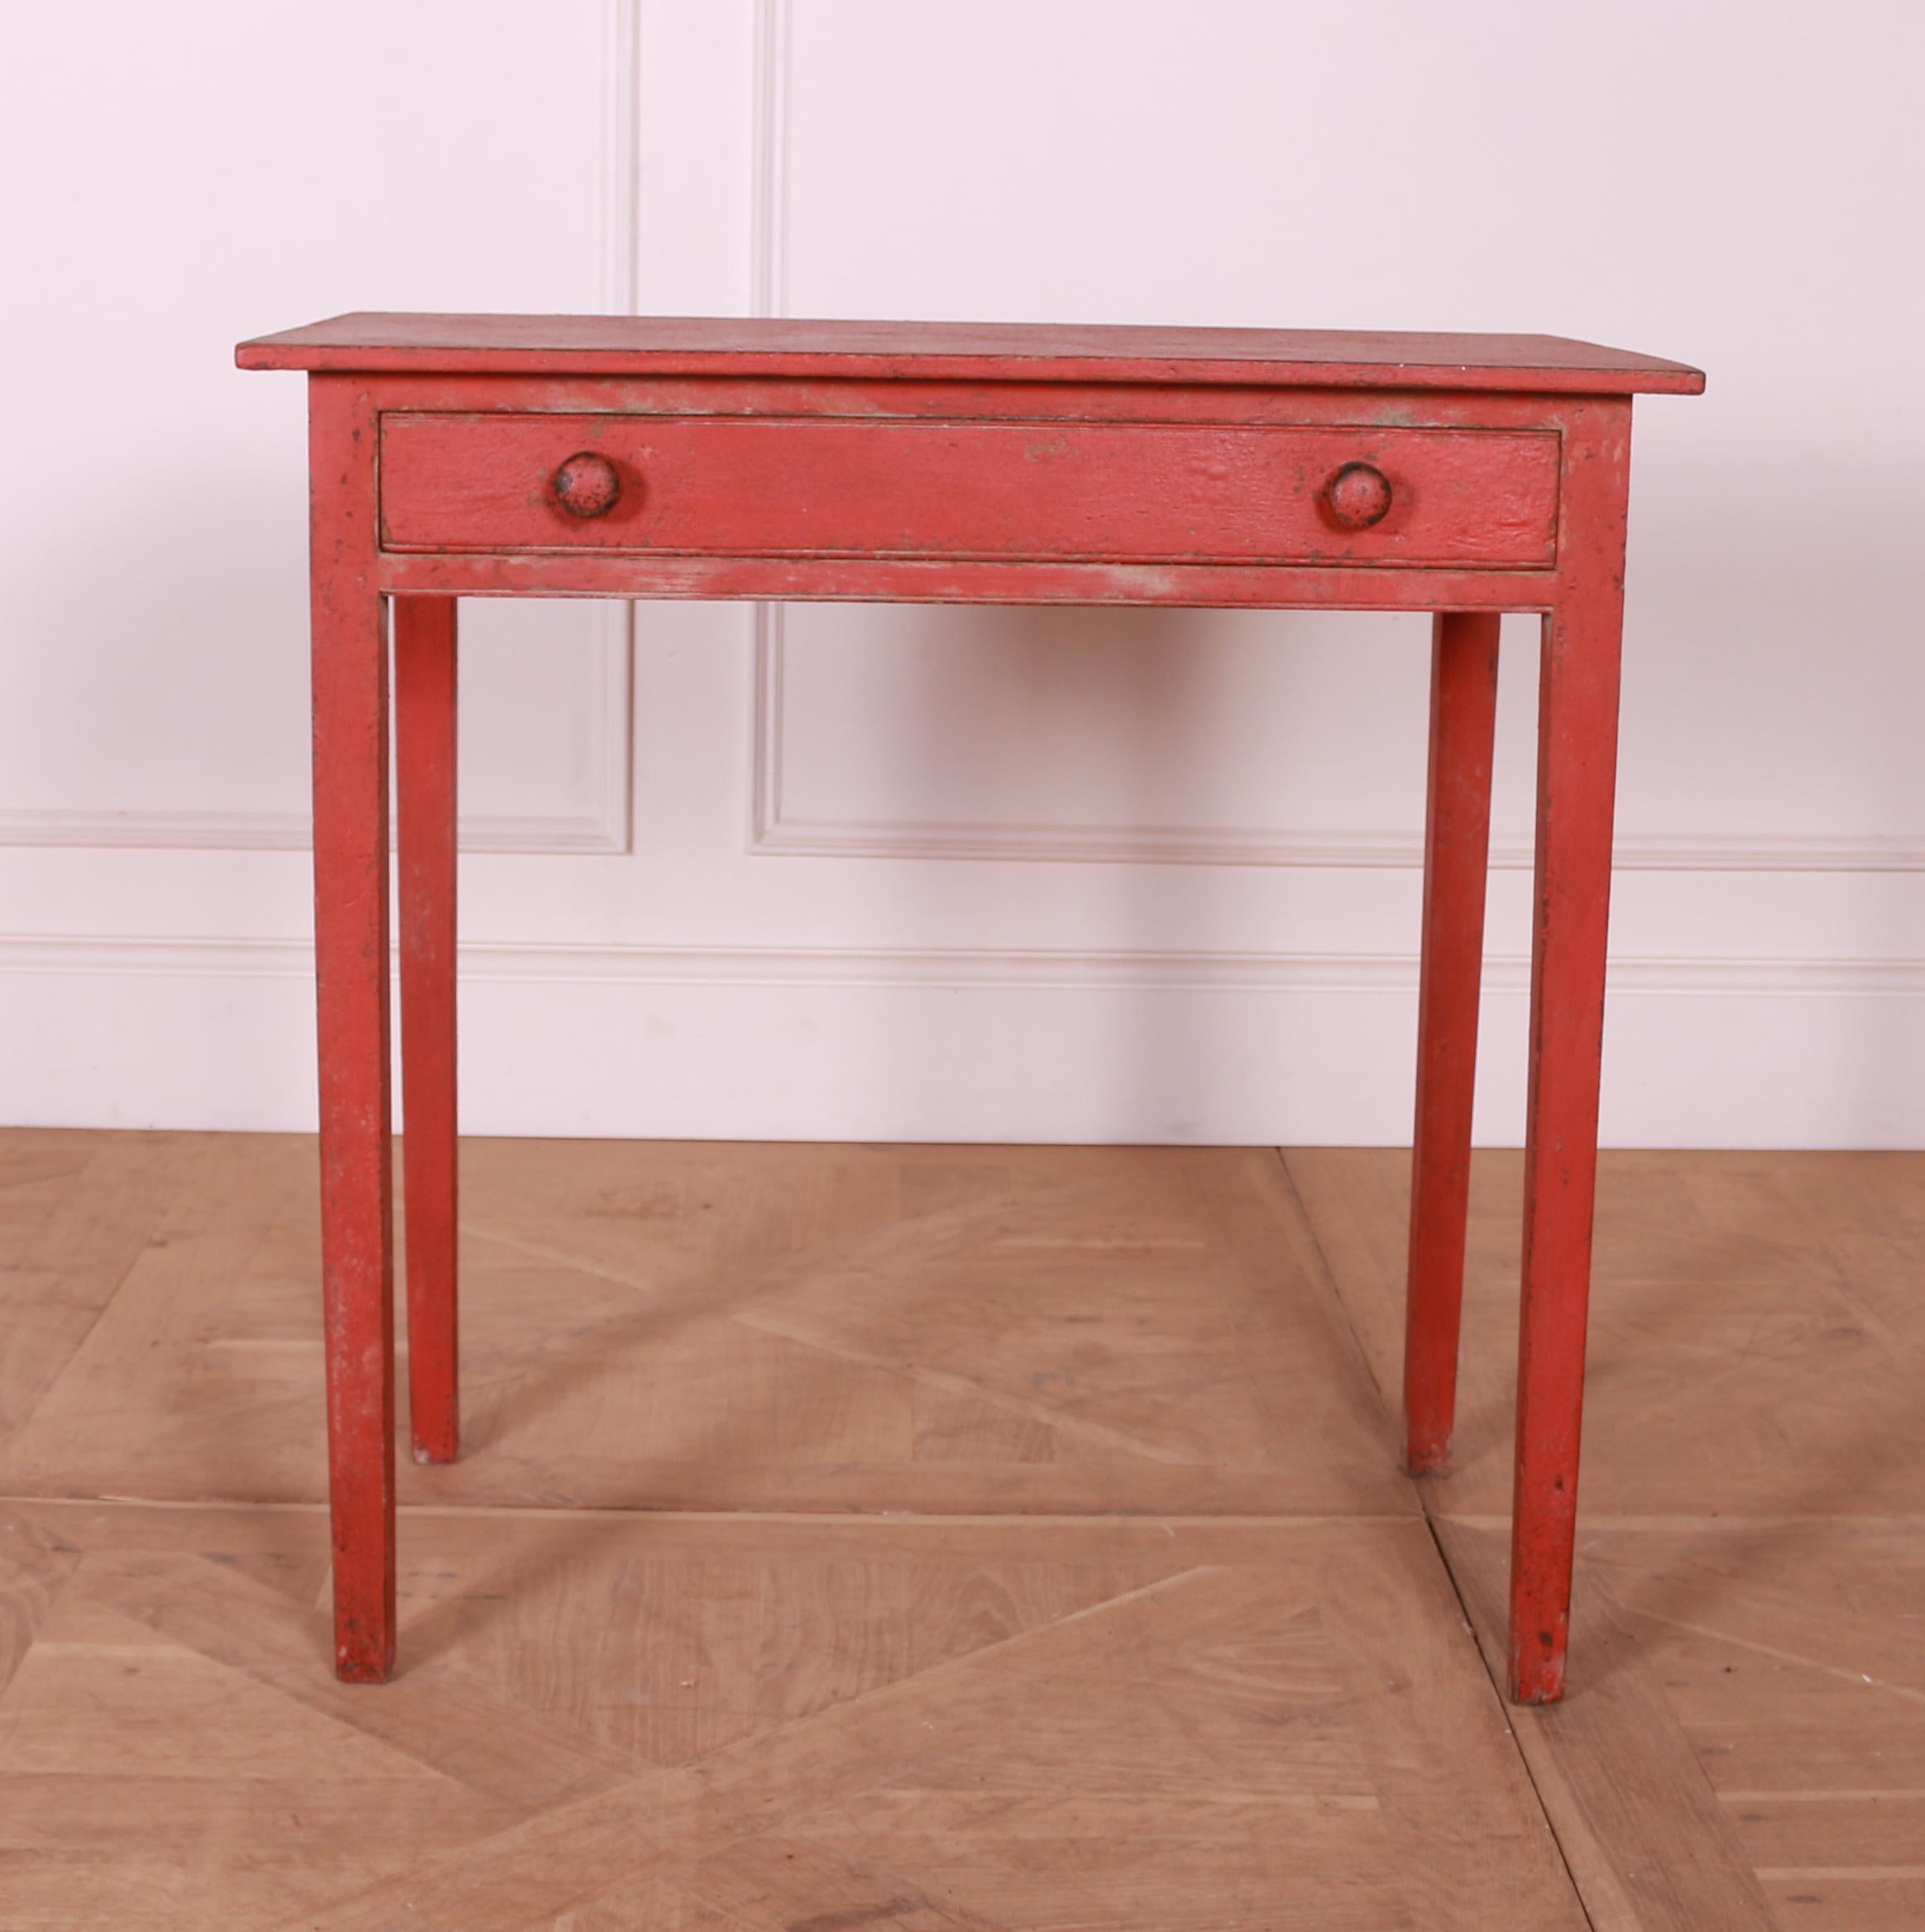 19th C English one drawer painted lamp table. 1830.

Dimensions
29.5 inches (75 cms) Wide
18 inches (46 cms) Deep
29 inches (74 cms) High.

   